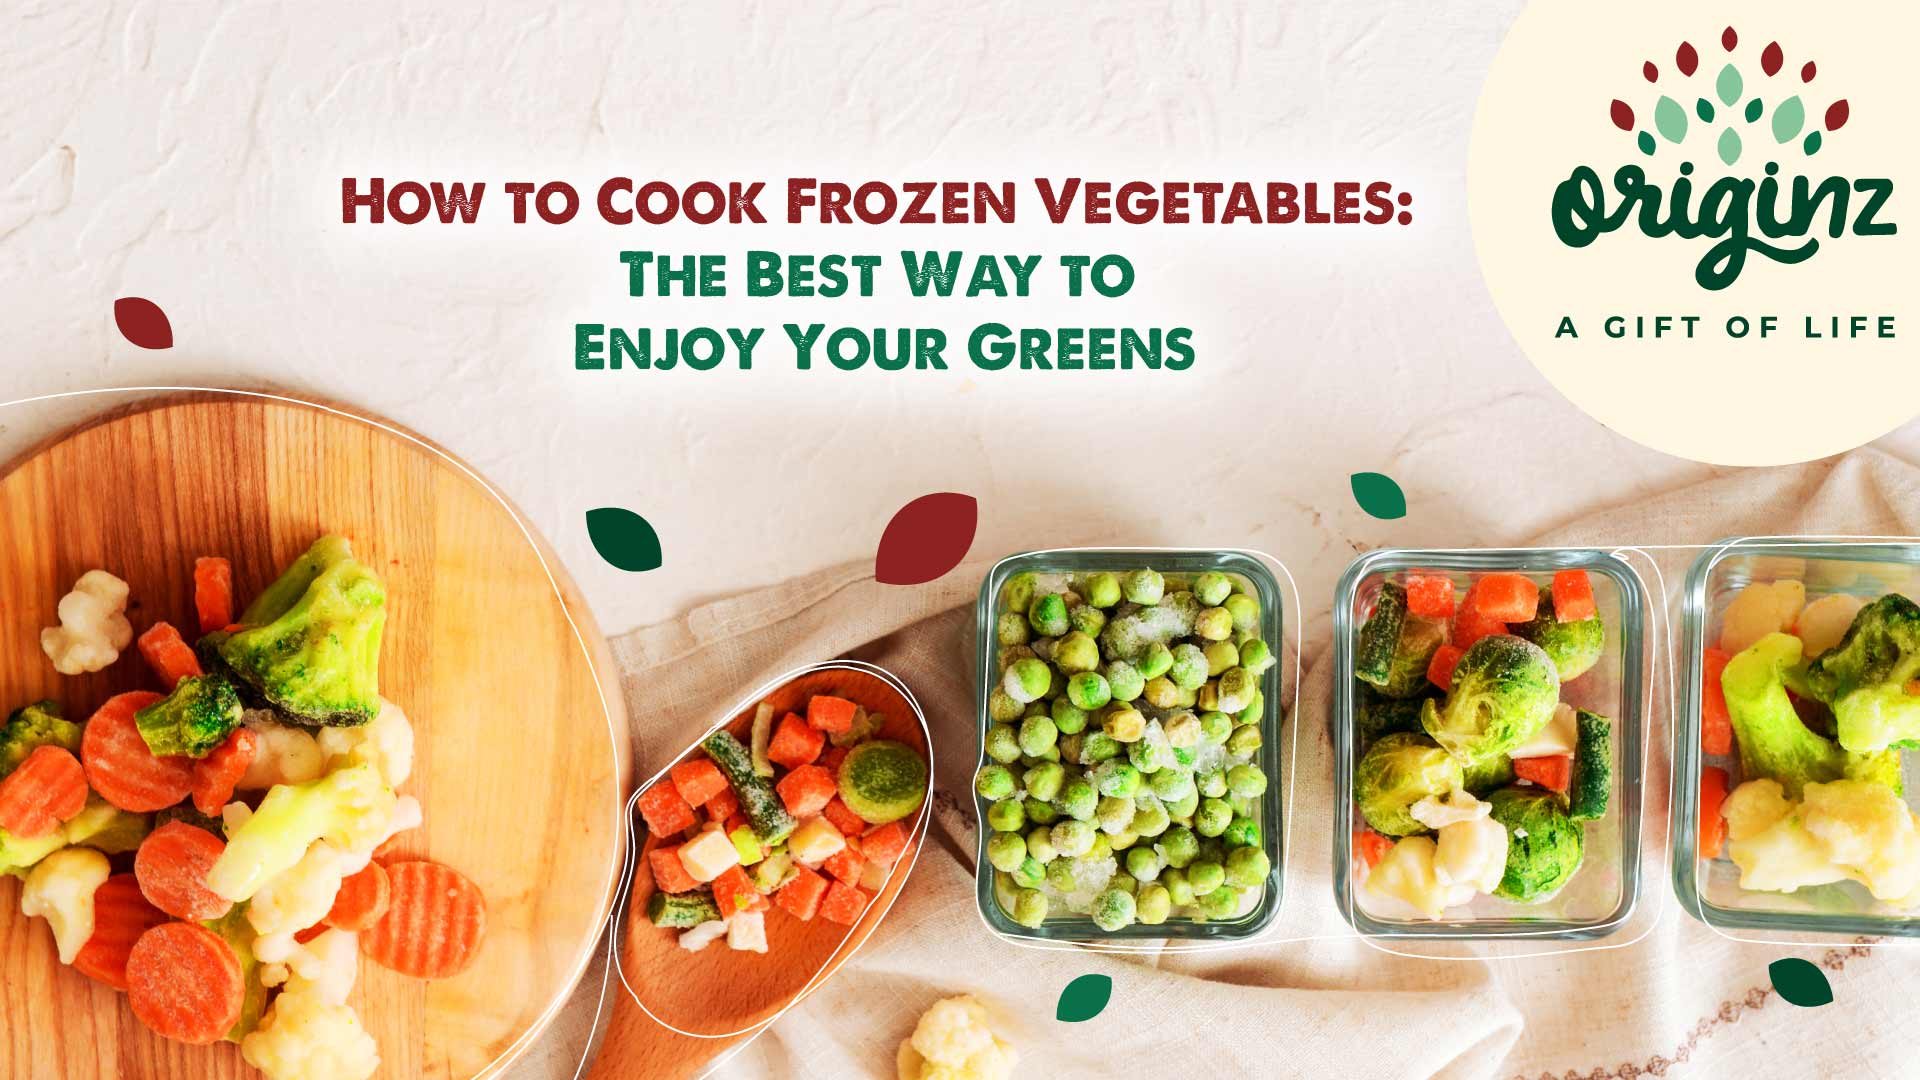 How to Cook Frozen Vegetables: The Best Way to Enjoy Your Greens